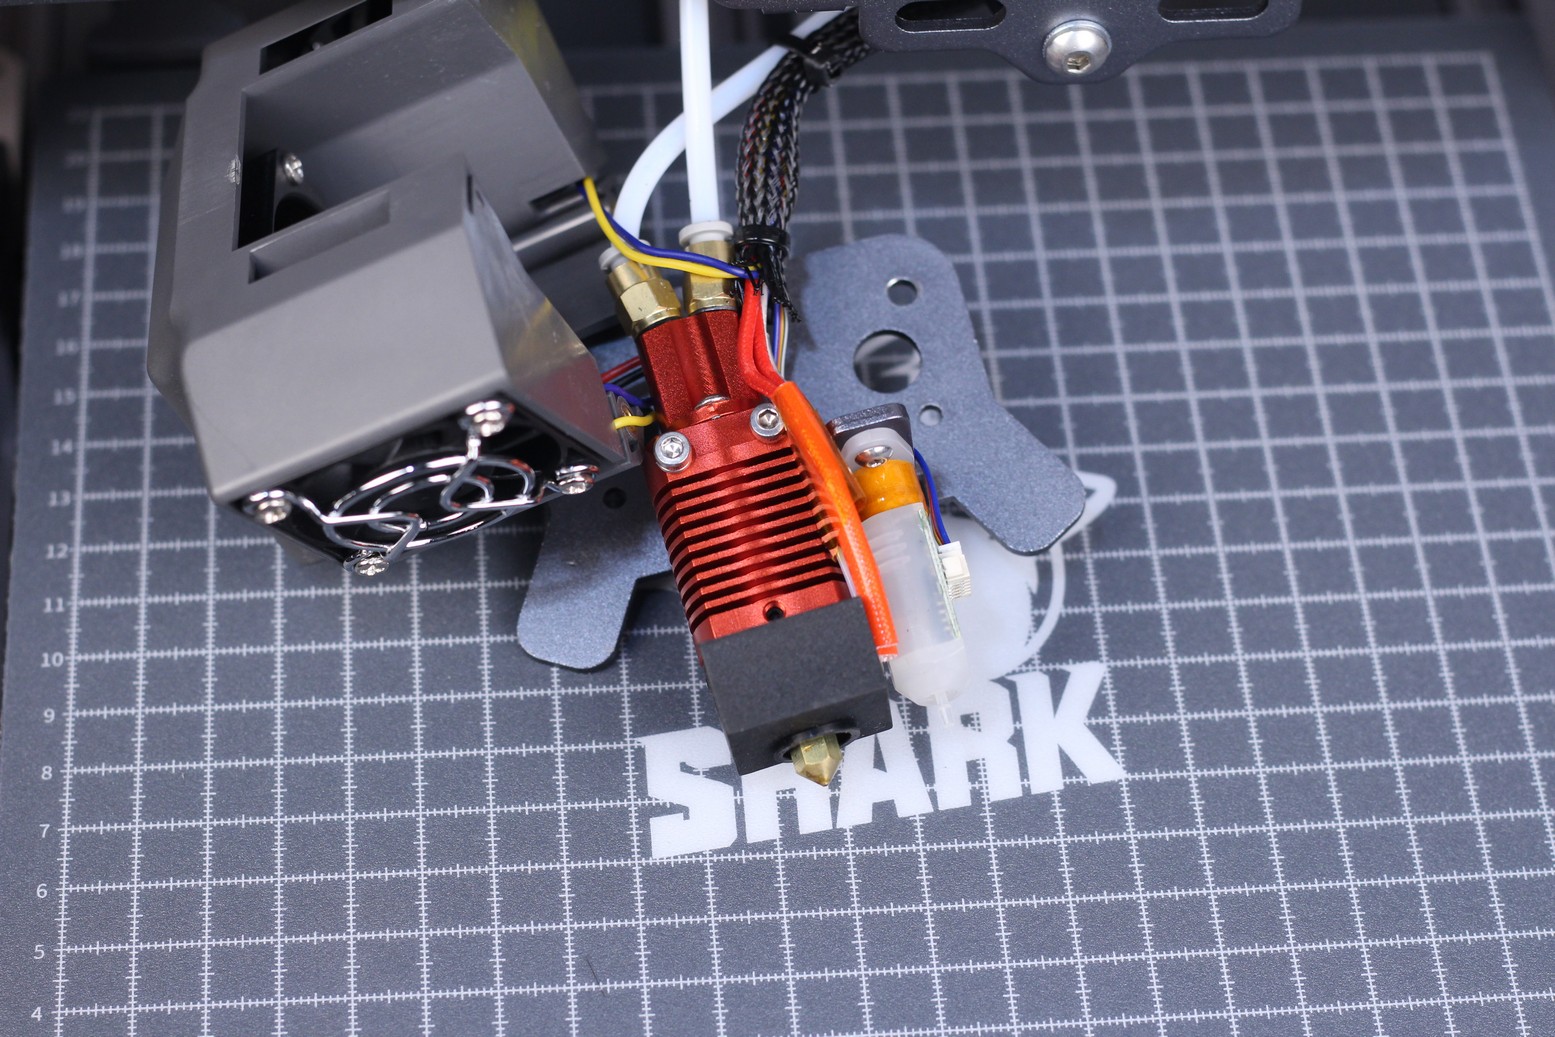 LOTMAXX Shark PTFE Lined Hotend | LOTMAXX SC-10 Shark V2 Review: Dual Color Printing and Laser Engraving